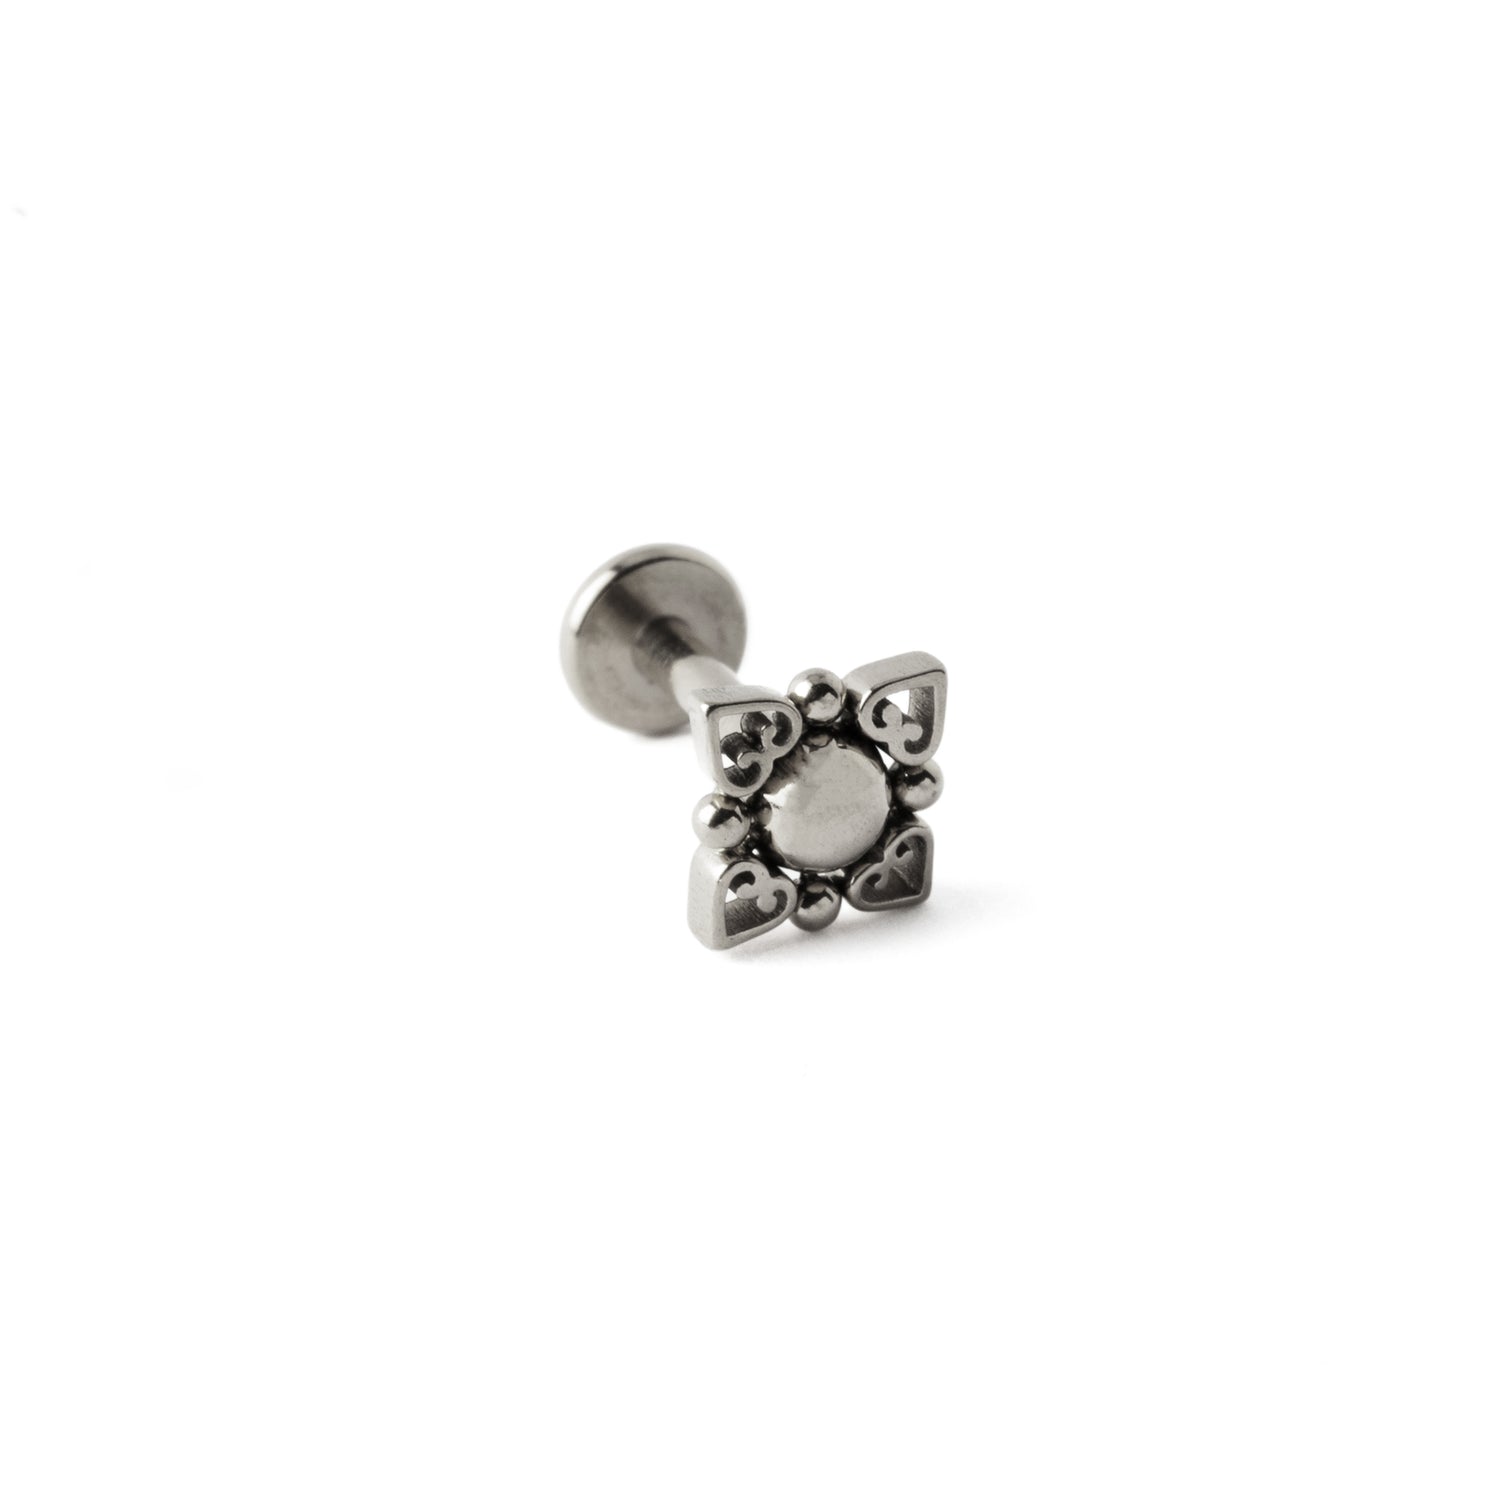 Neptune surgical steel internally threaded Labret stud right side view